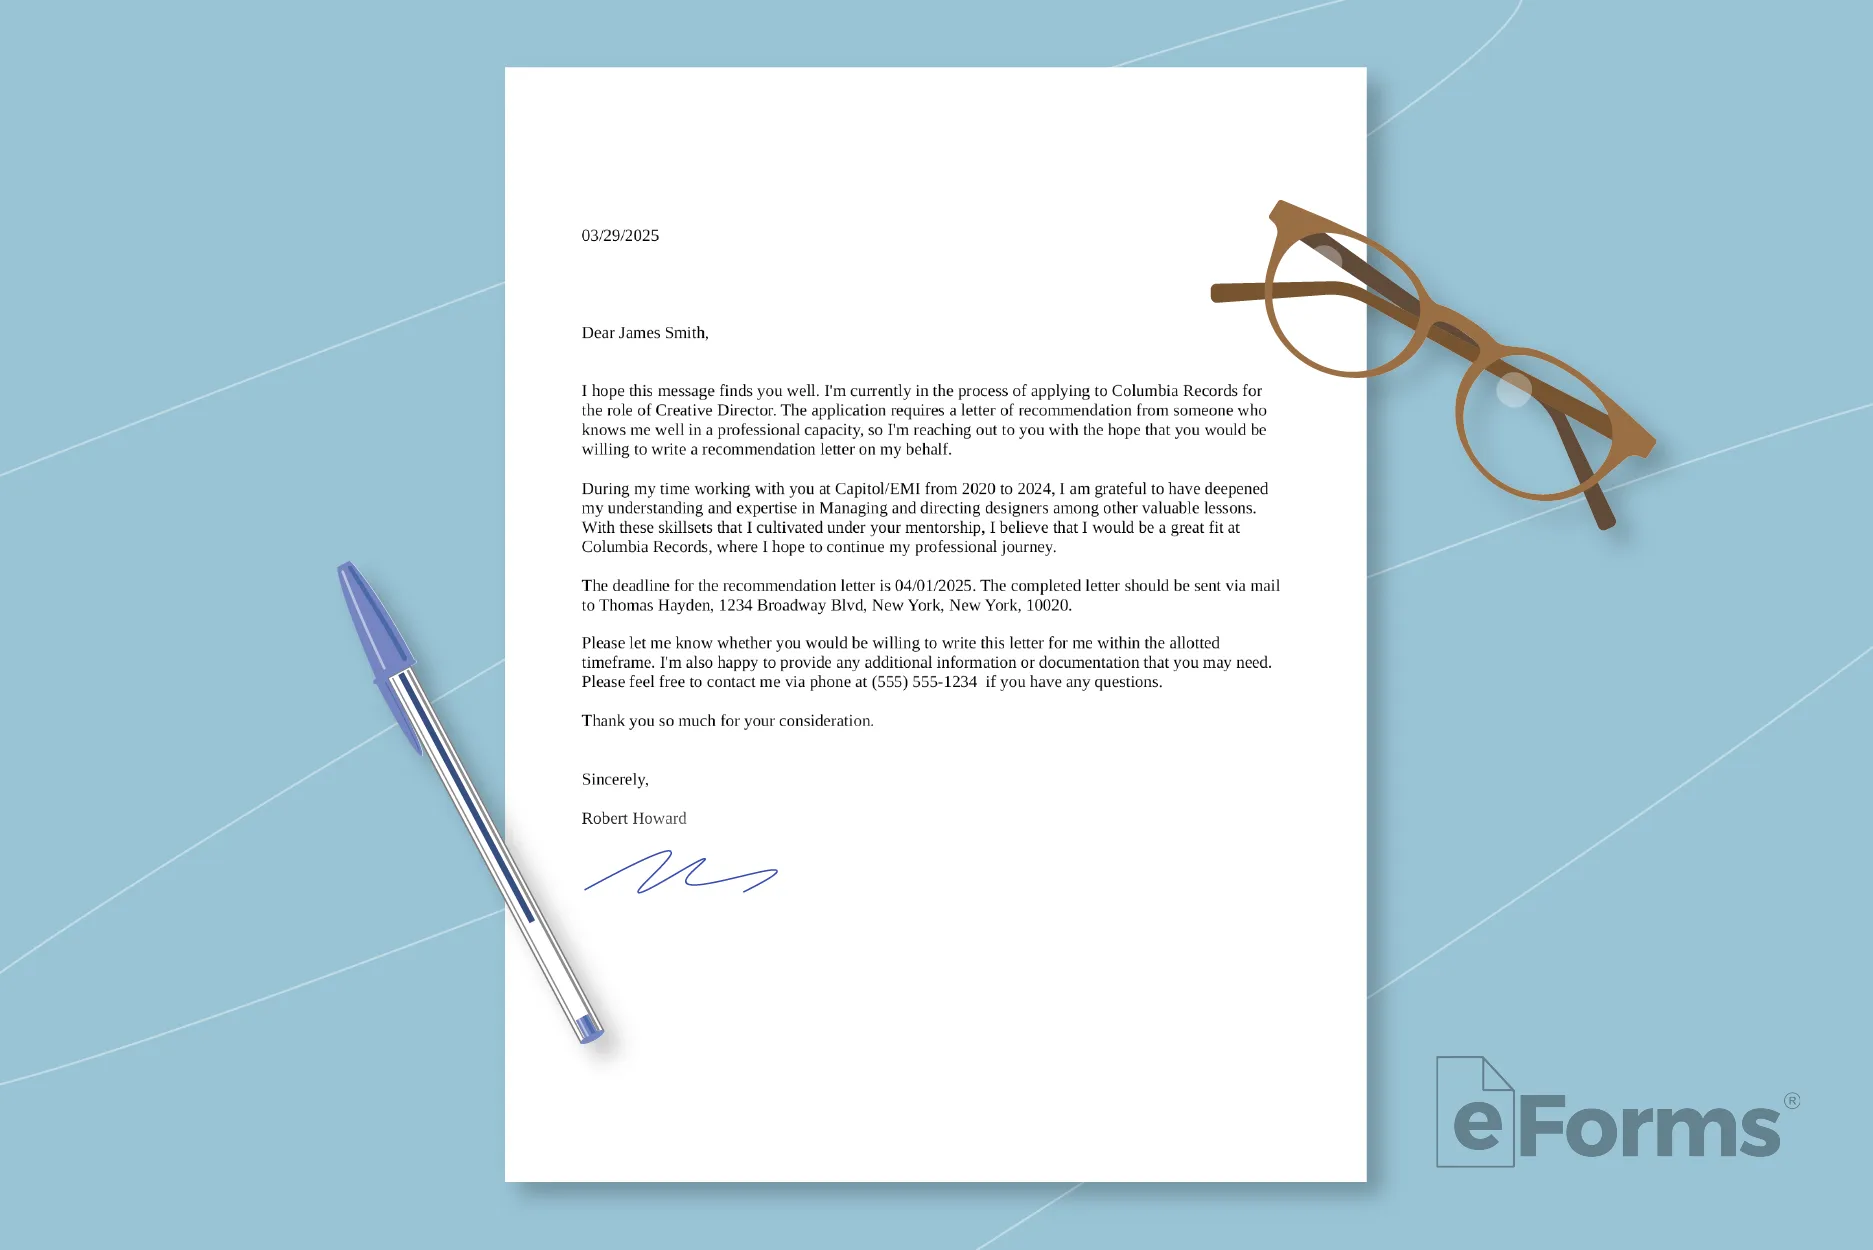 Request letter with pair of glasses and pen.